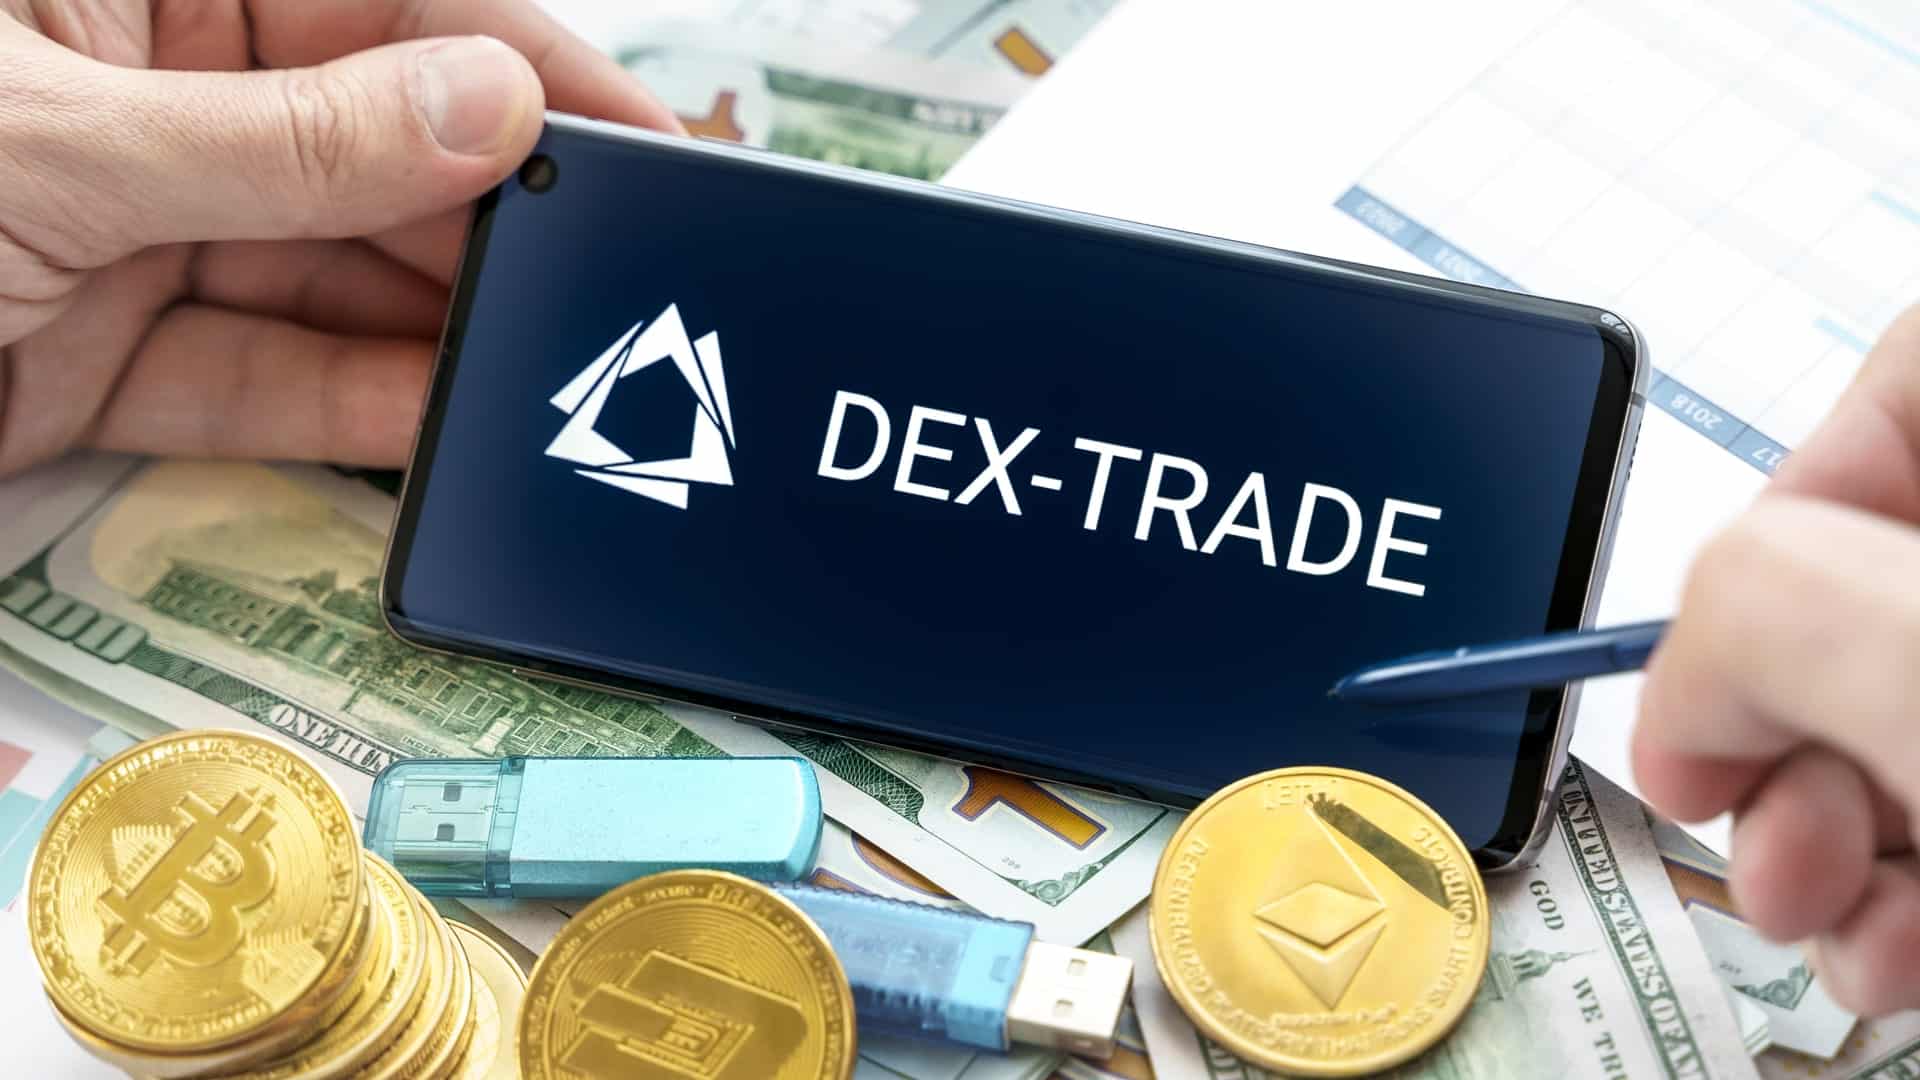 Following the Chinese ban, investors are transferring capital to DEX